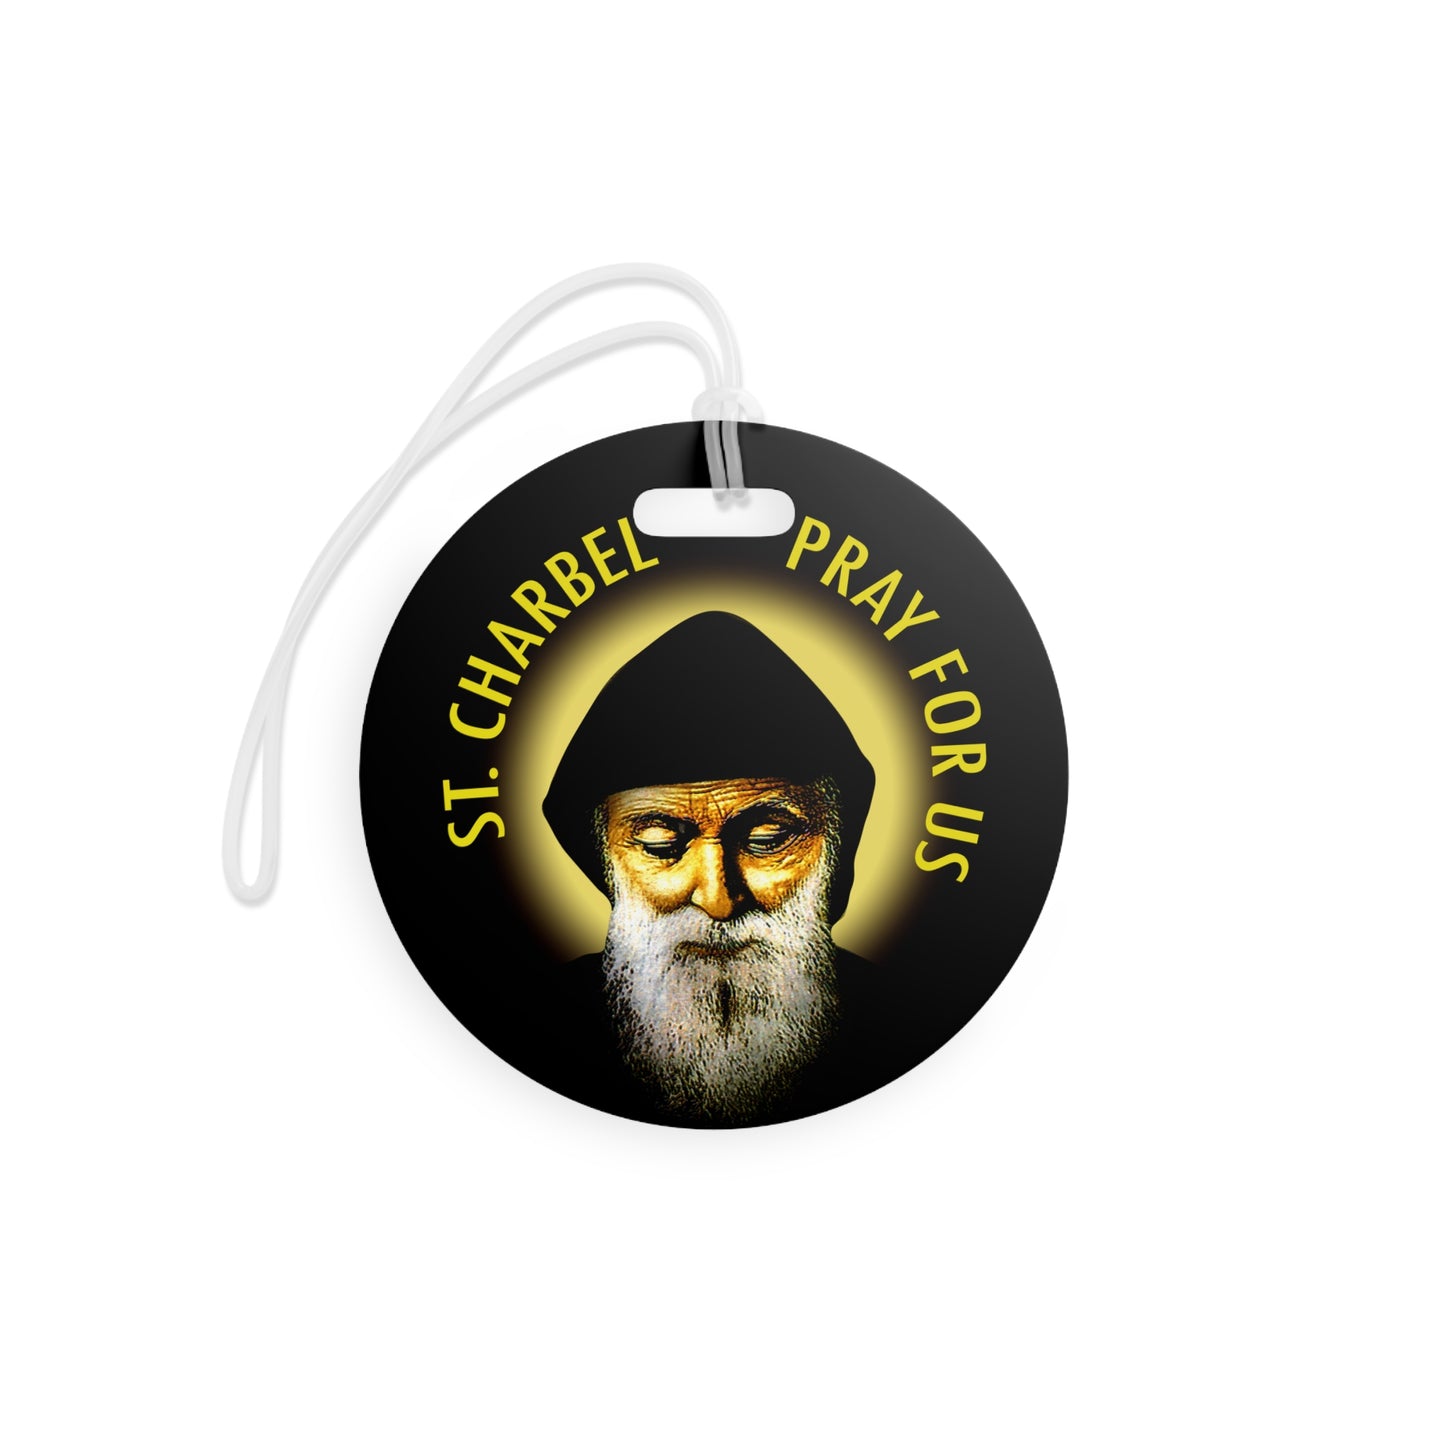 St Charbel Luggage Tags